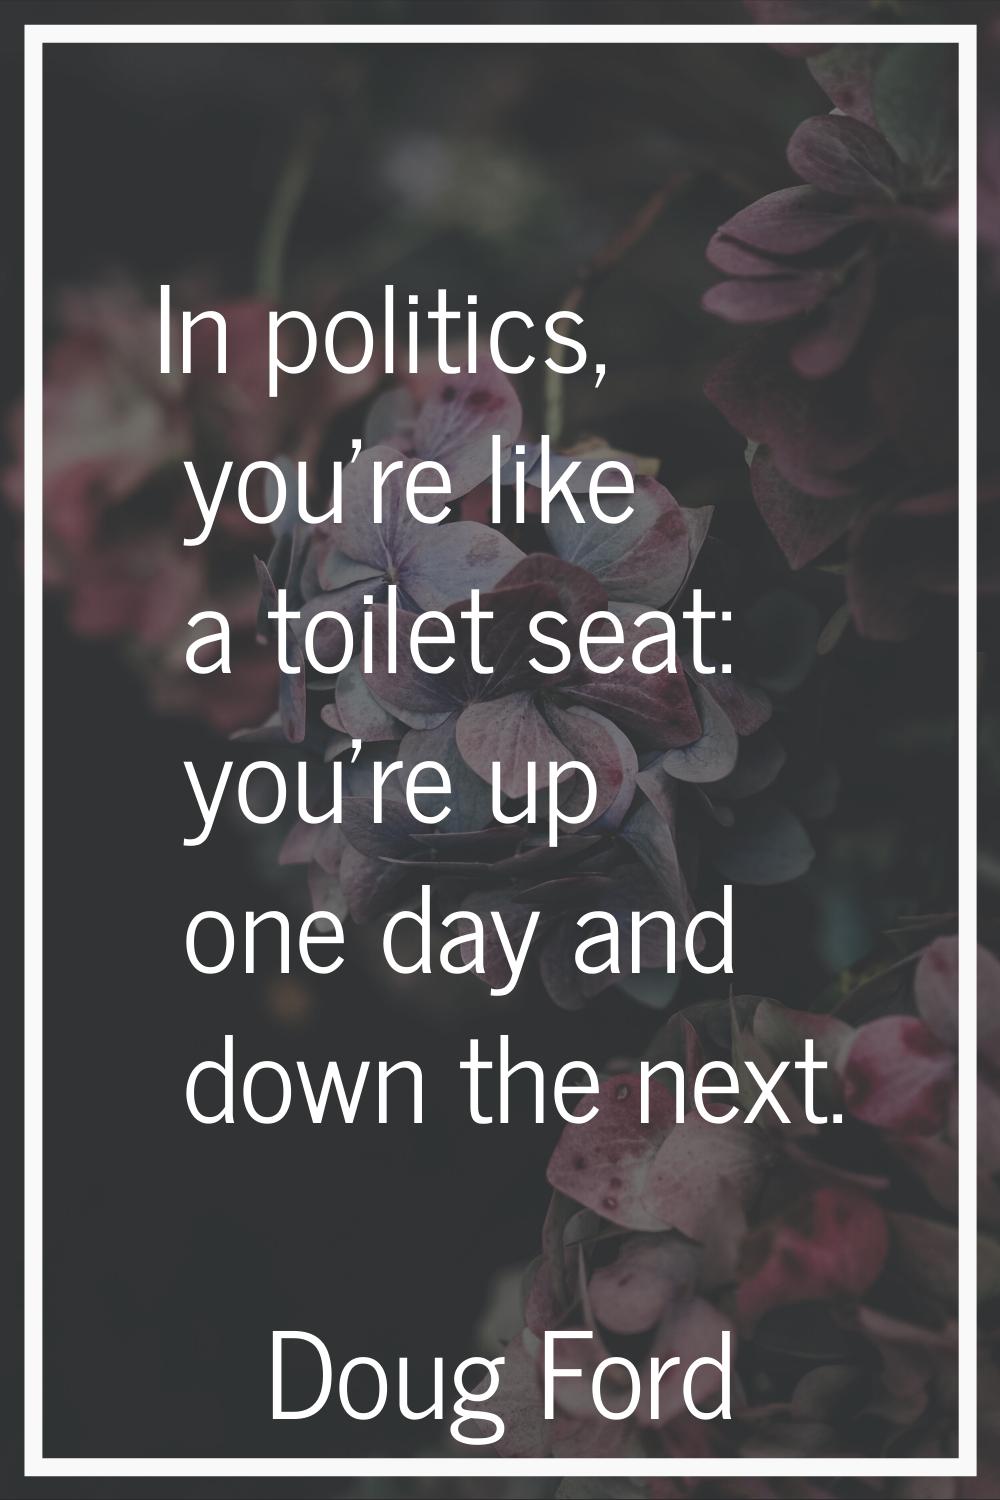 In politics, you're like a toilet seat: you're up one day and down the next.